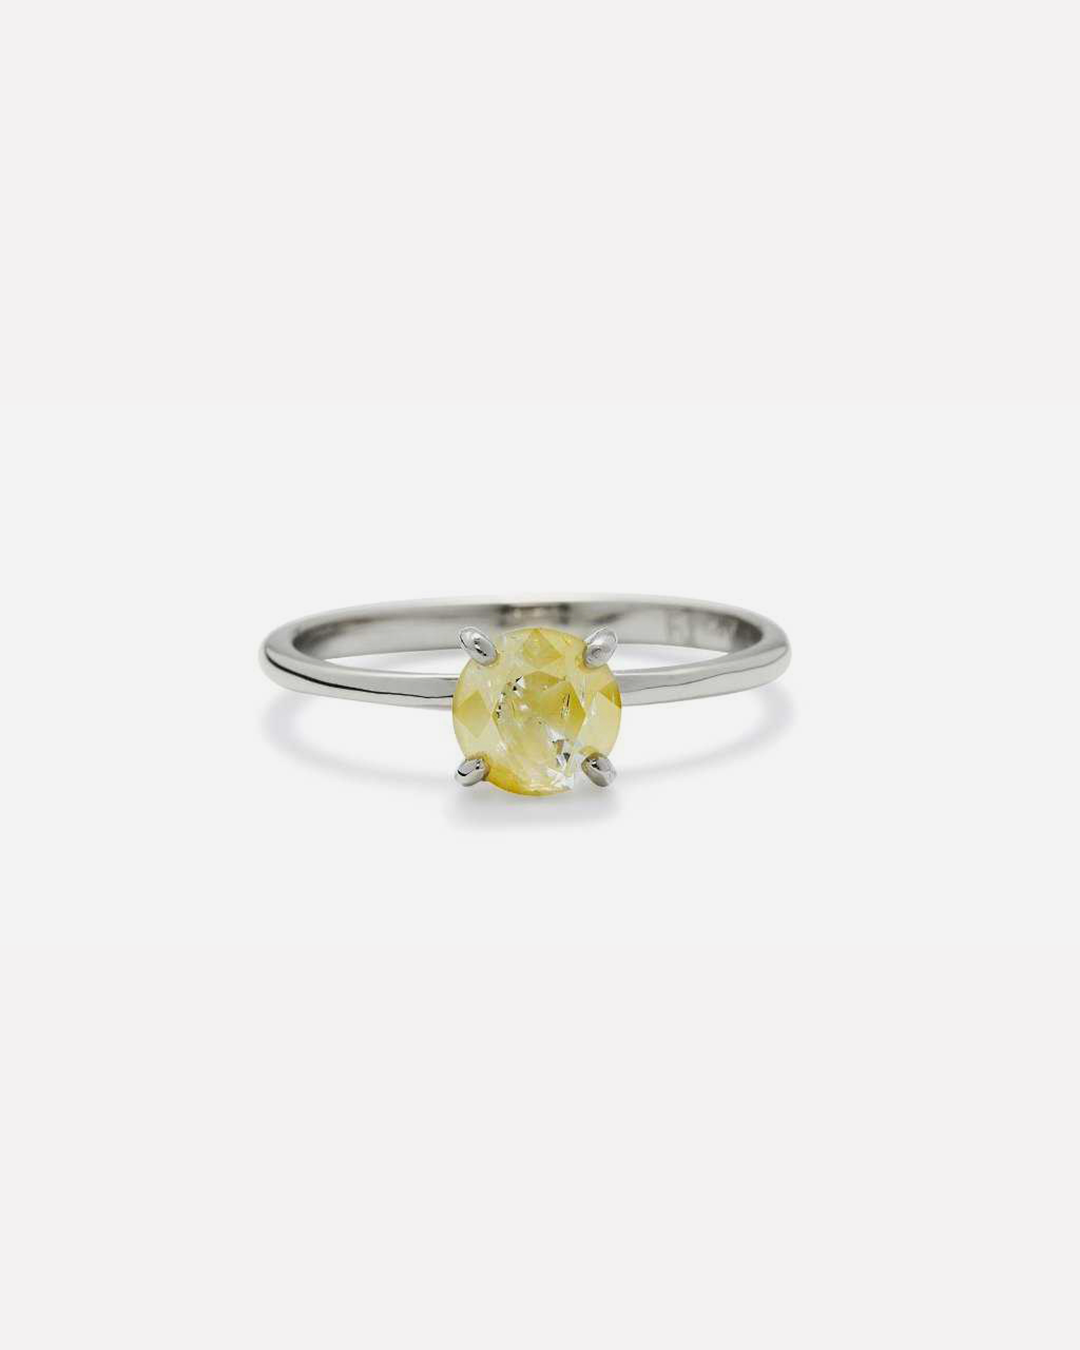 Lara / Fancy Yellow Diamond Ring By fitzgerald jewelry in Engagement Rings Category